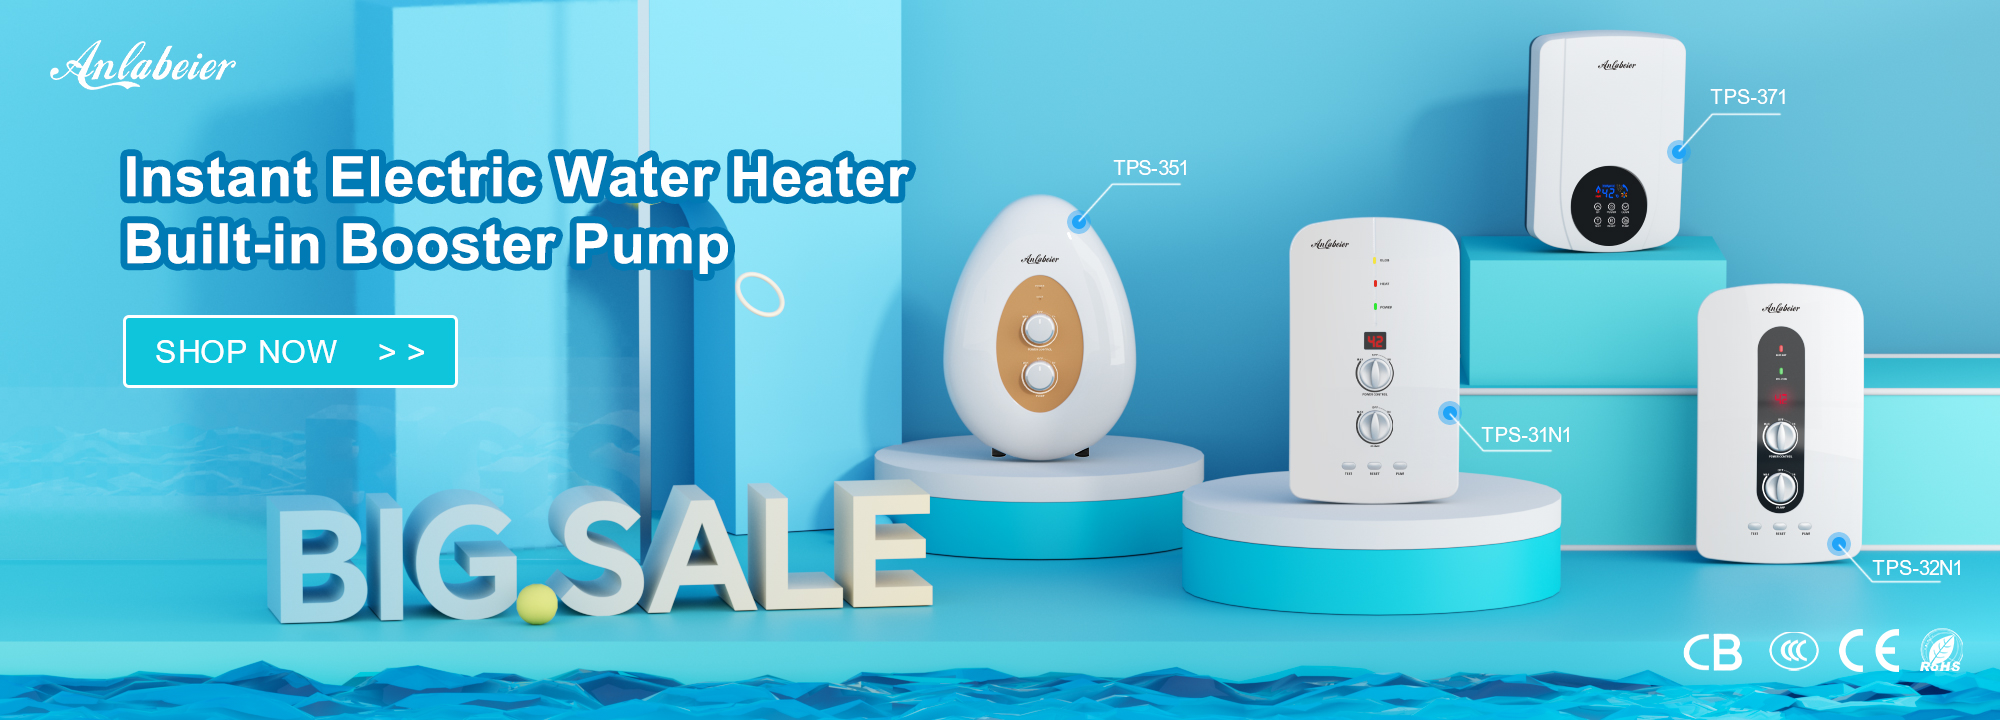 ELECTRIC WATER HEATER WITH PUMP